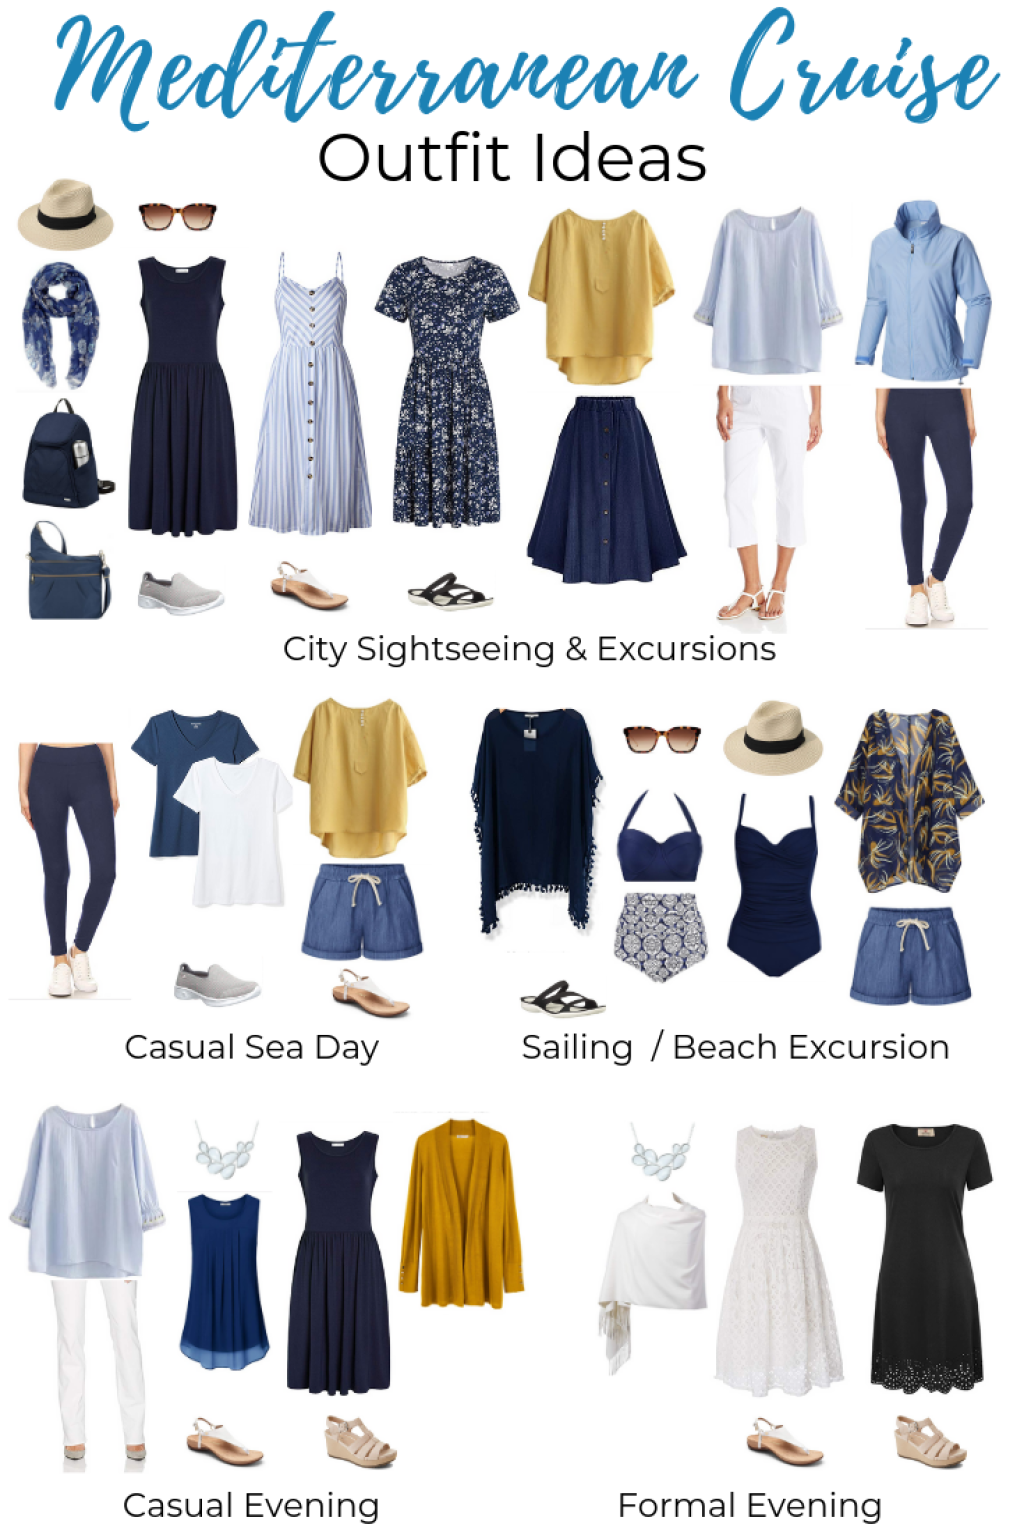 cruise ship outfit ideas - What to Pack for a Mediterranean Cruise - Packing List & Outfit Ideas!